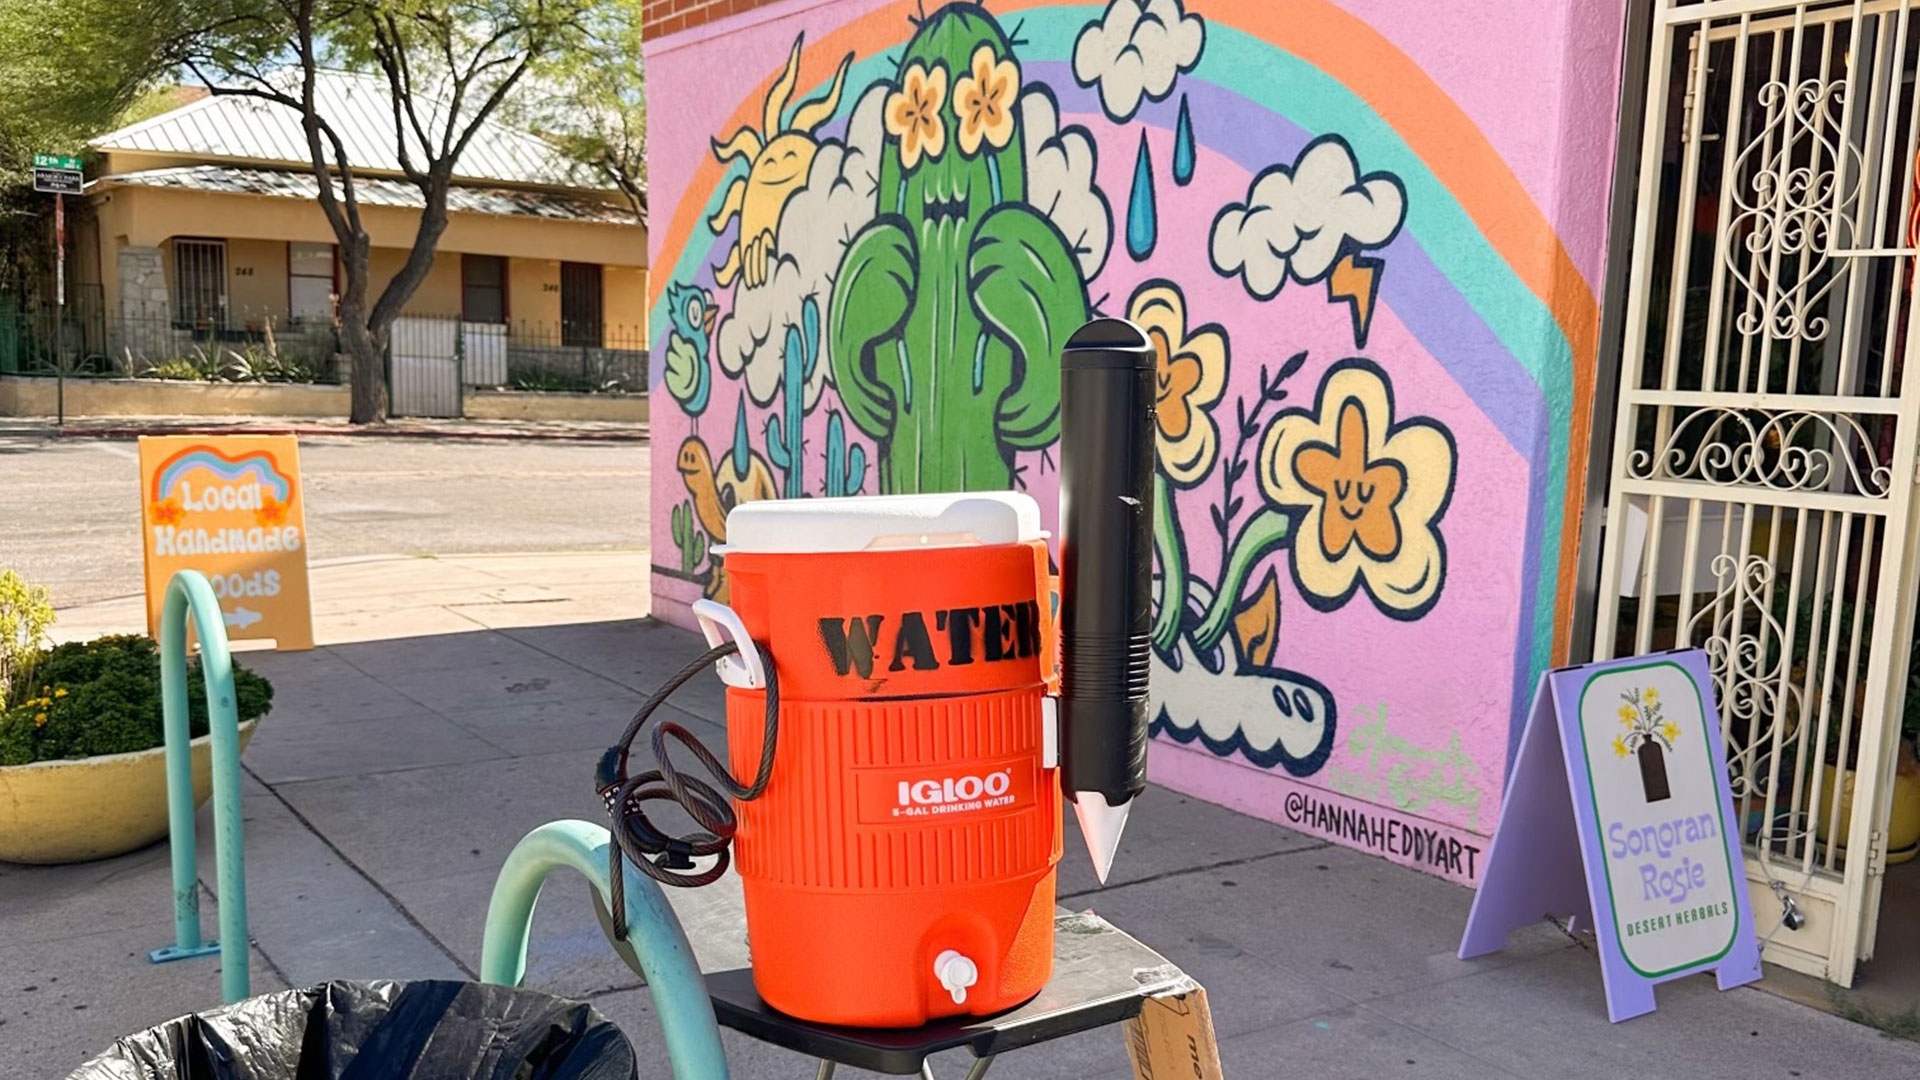 Local businesses set up community water stations in the face of extreme heat